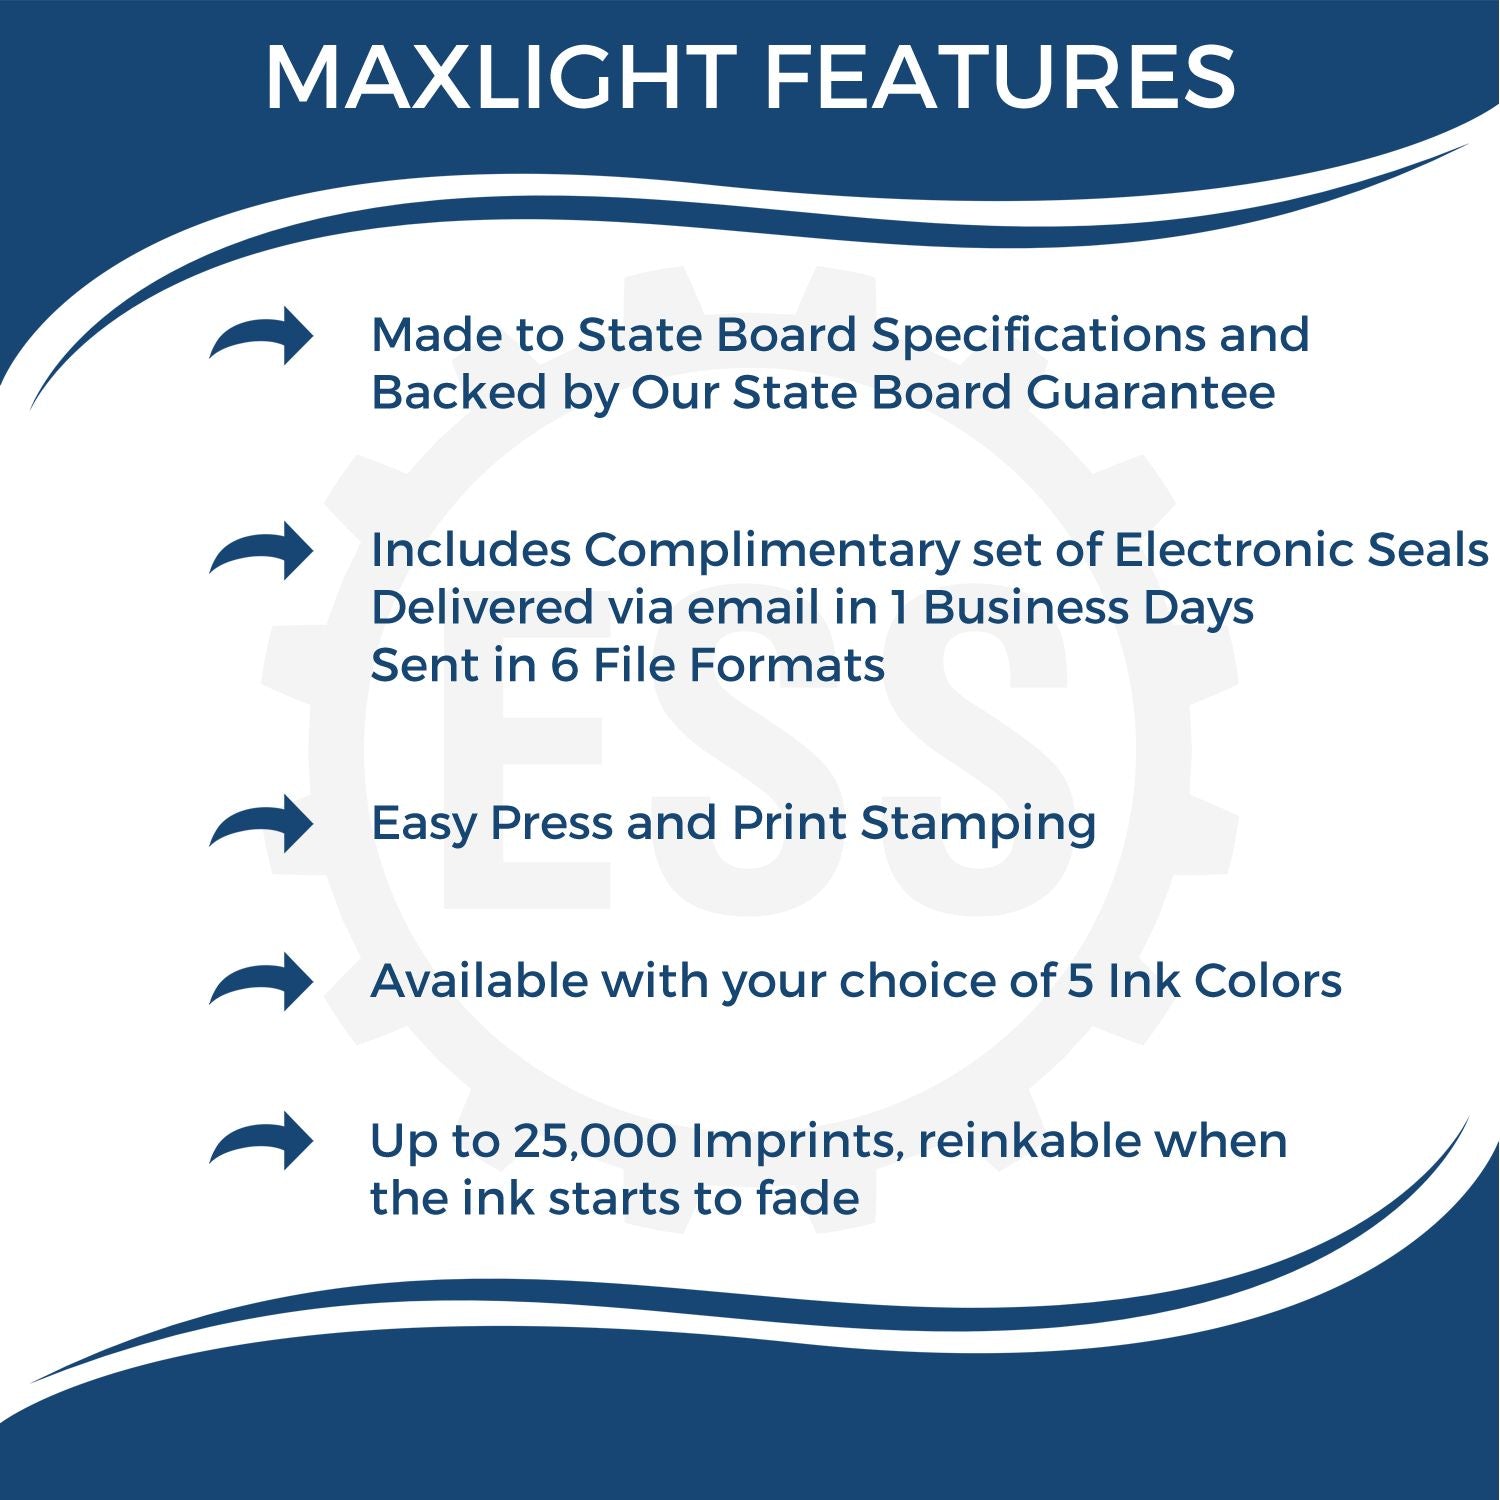 A picture of an infographic highlighting the selling points for the Premium MaxLight Pre-Inked Puerto Rico Engineering Stamp